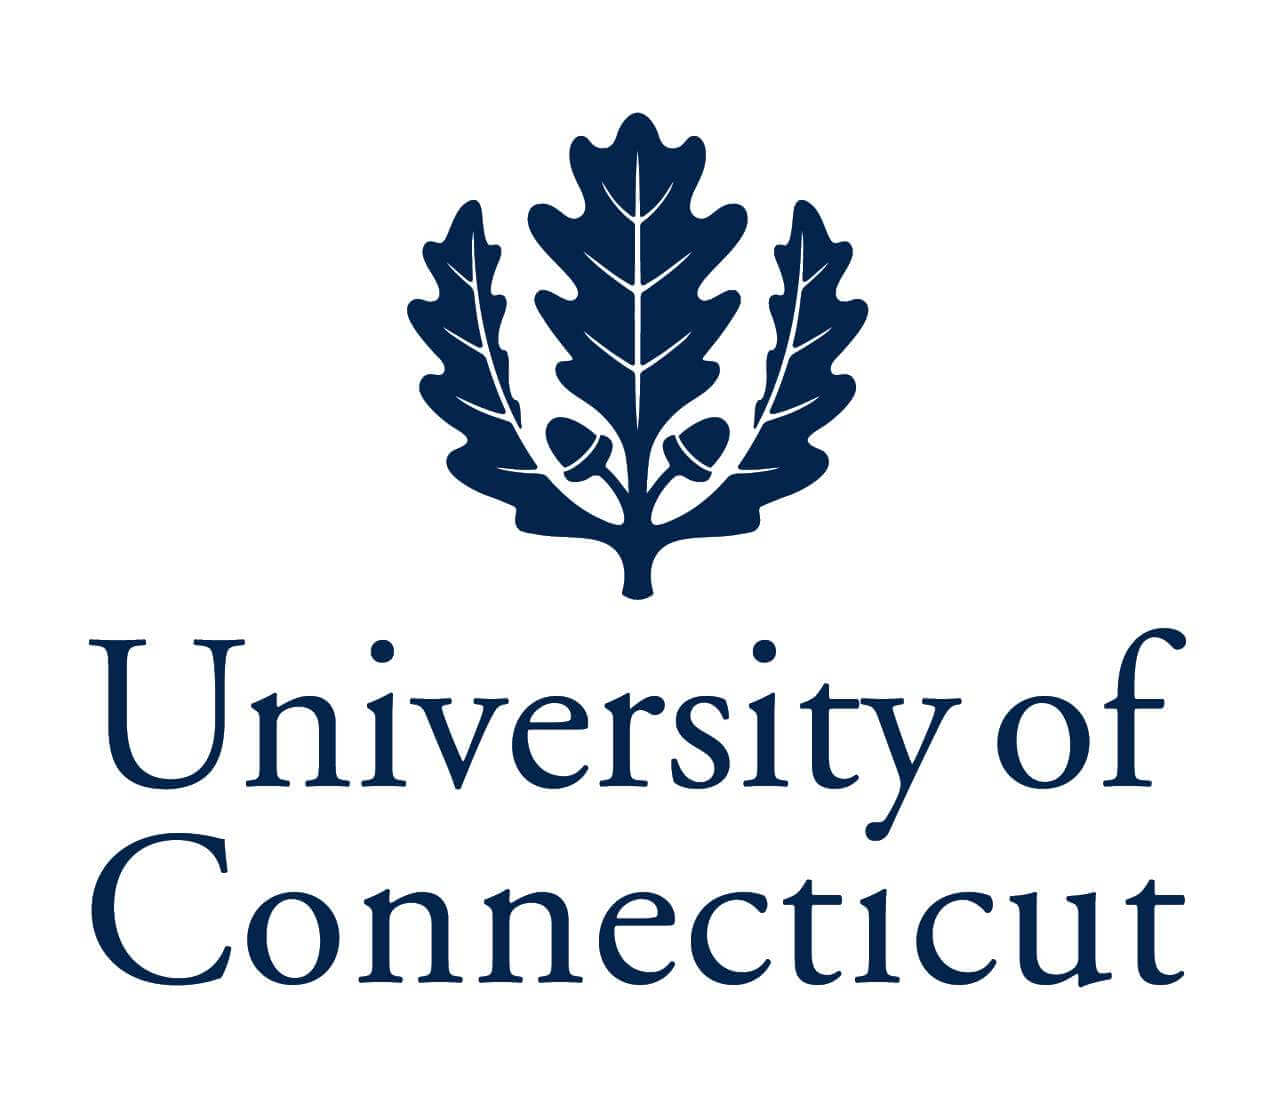 University of Connecticut in dark blue with a three leaf seal above the text.